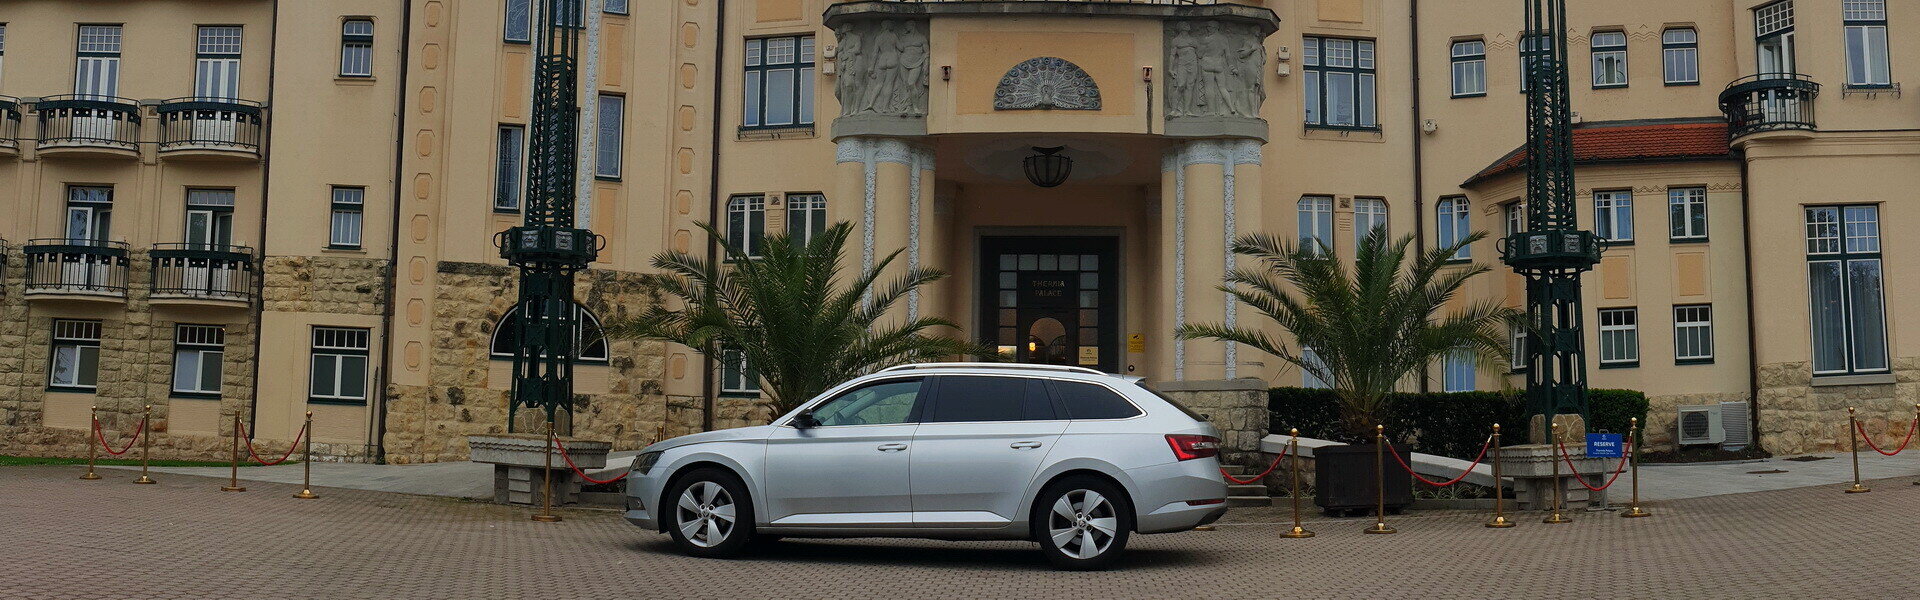 thermia palace piestany airport transfer